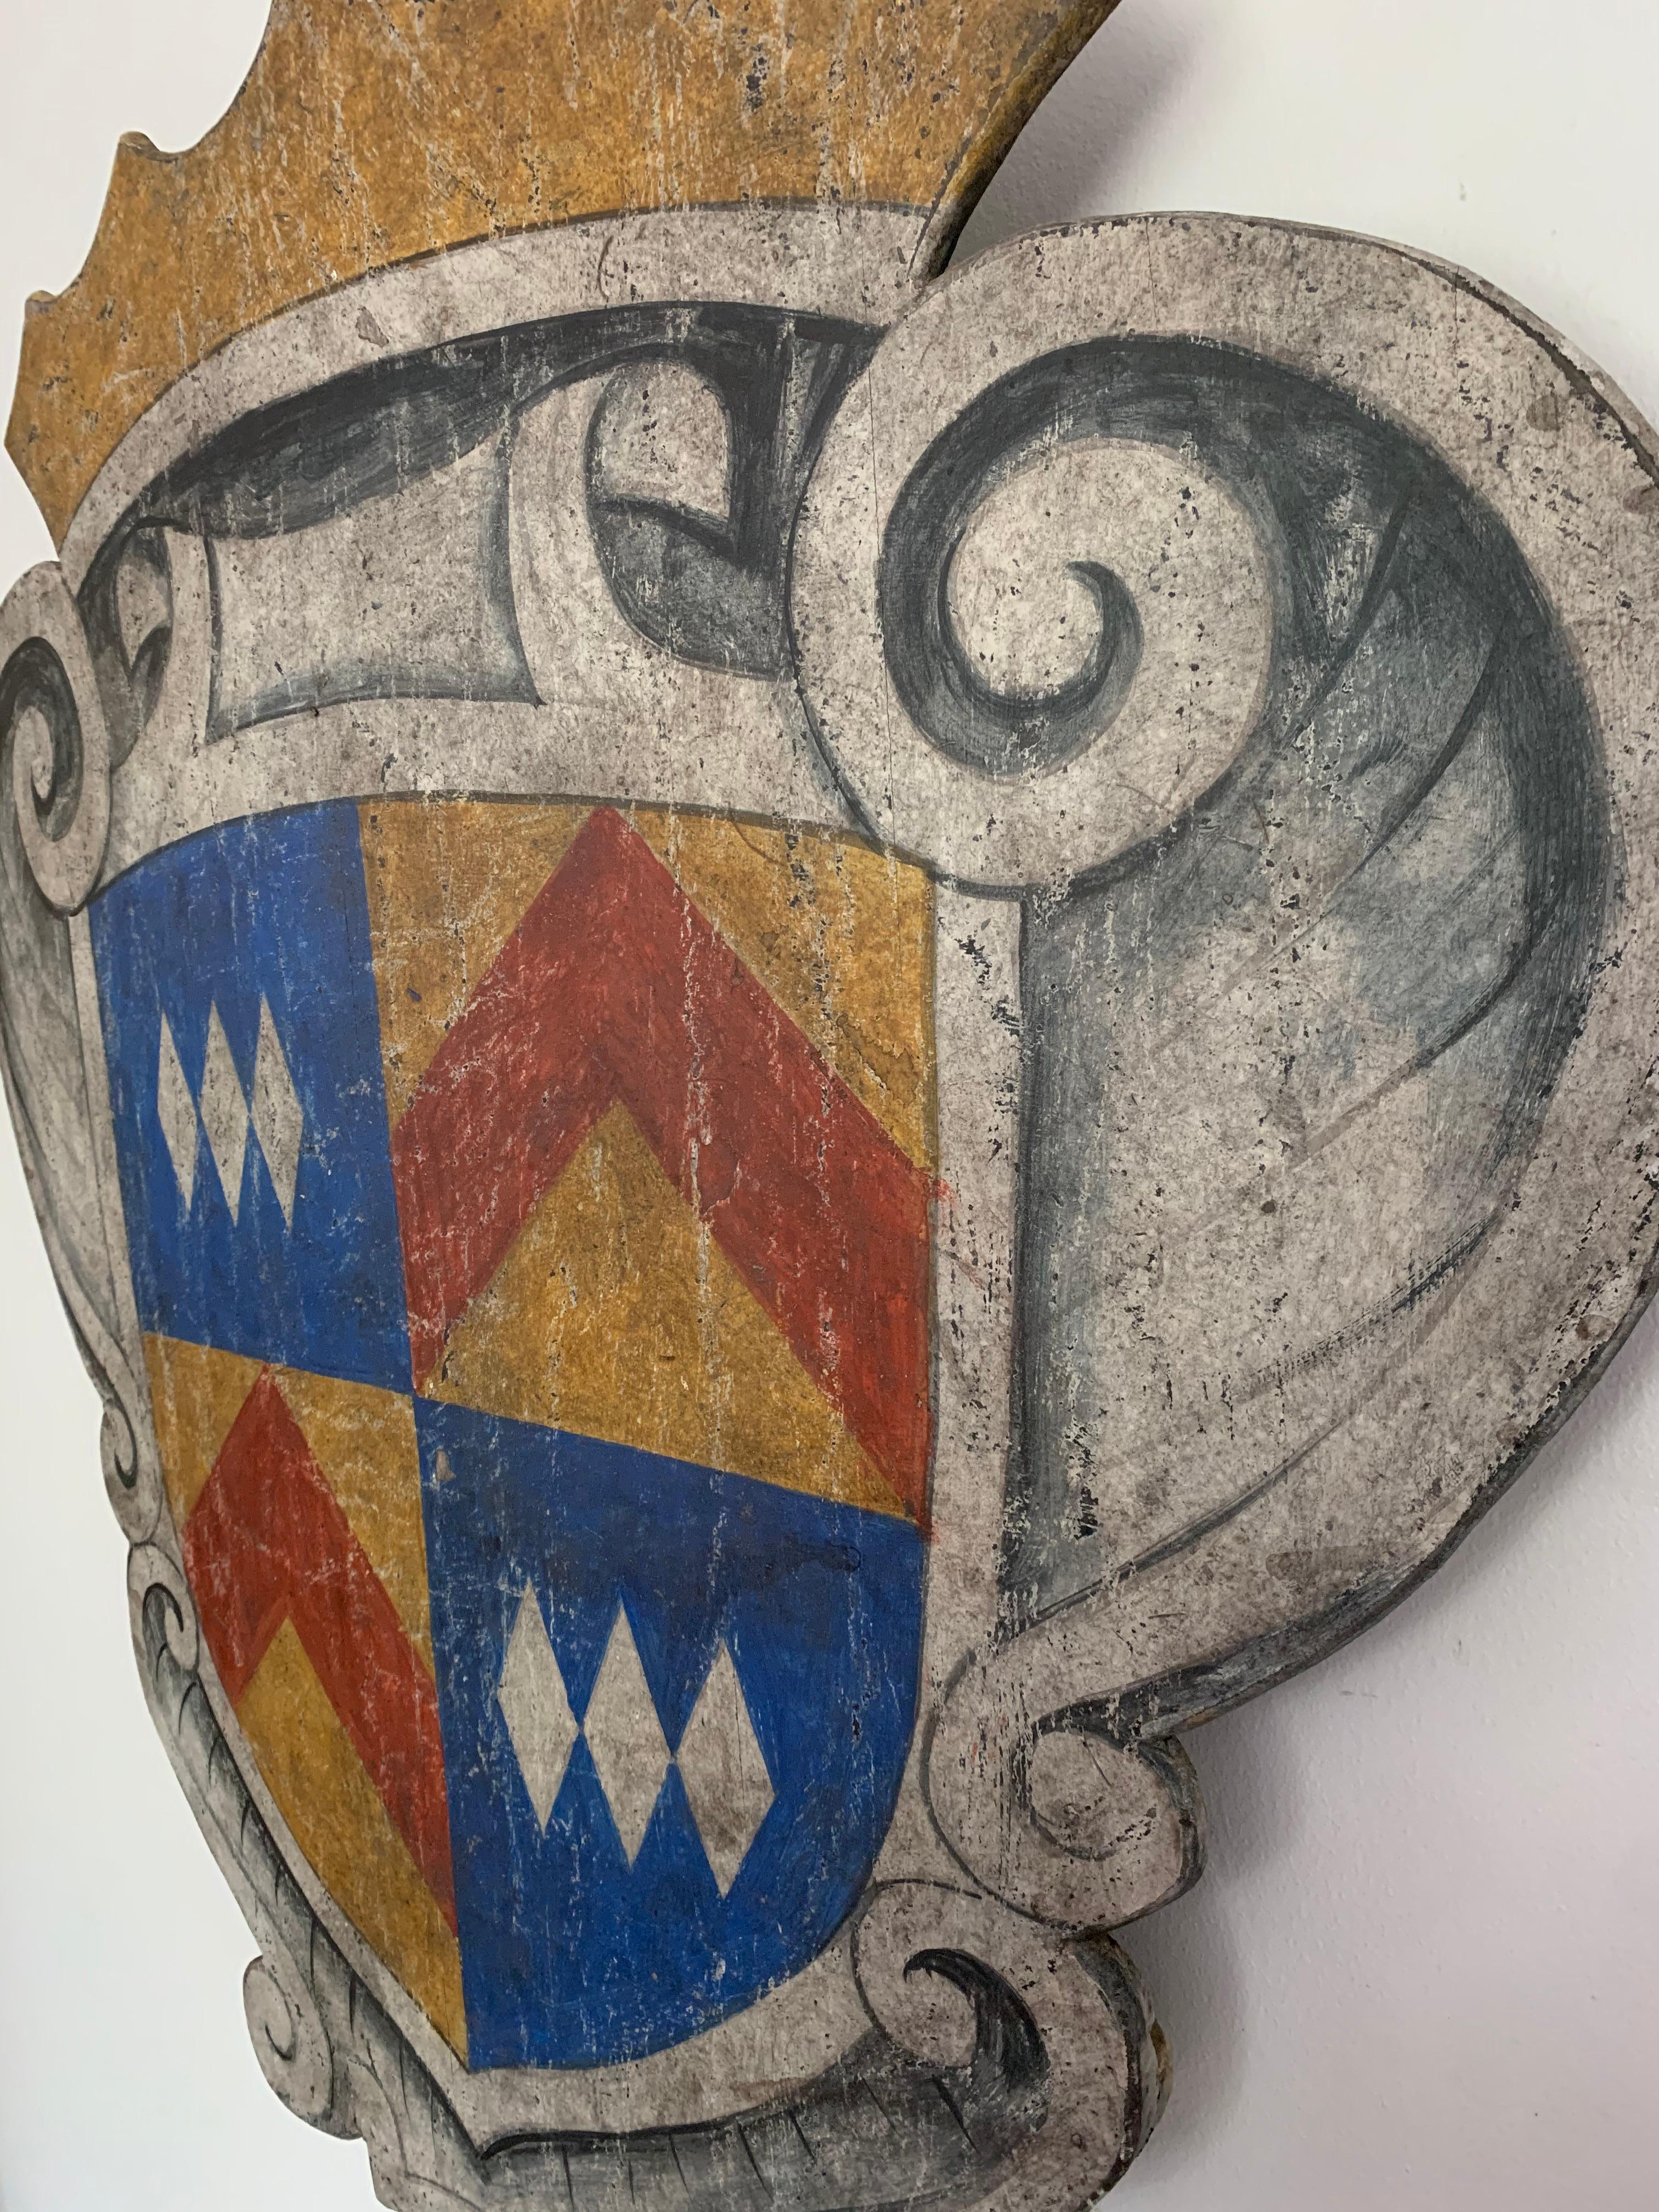 Decorate a games room or a study with this colorful painted curved plaque. Crafted in southern Italy, circa 1950, the painted wall sculpture features a center medallion decorated with a coat of arms with triple diamond and chevron motifs and a crown